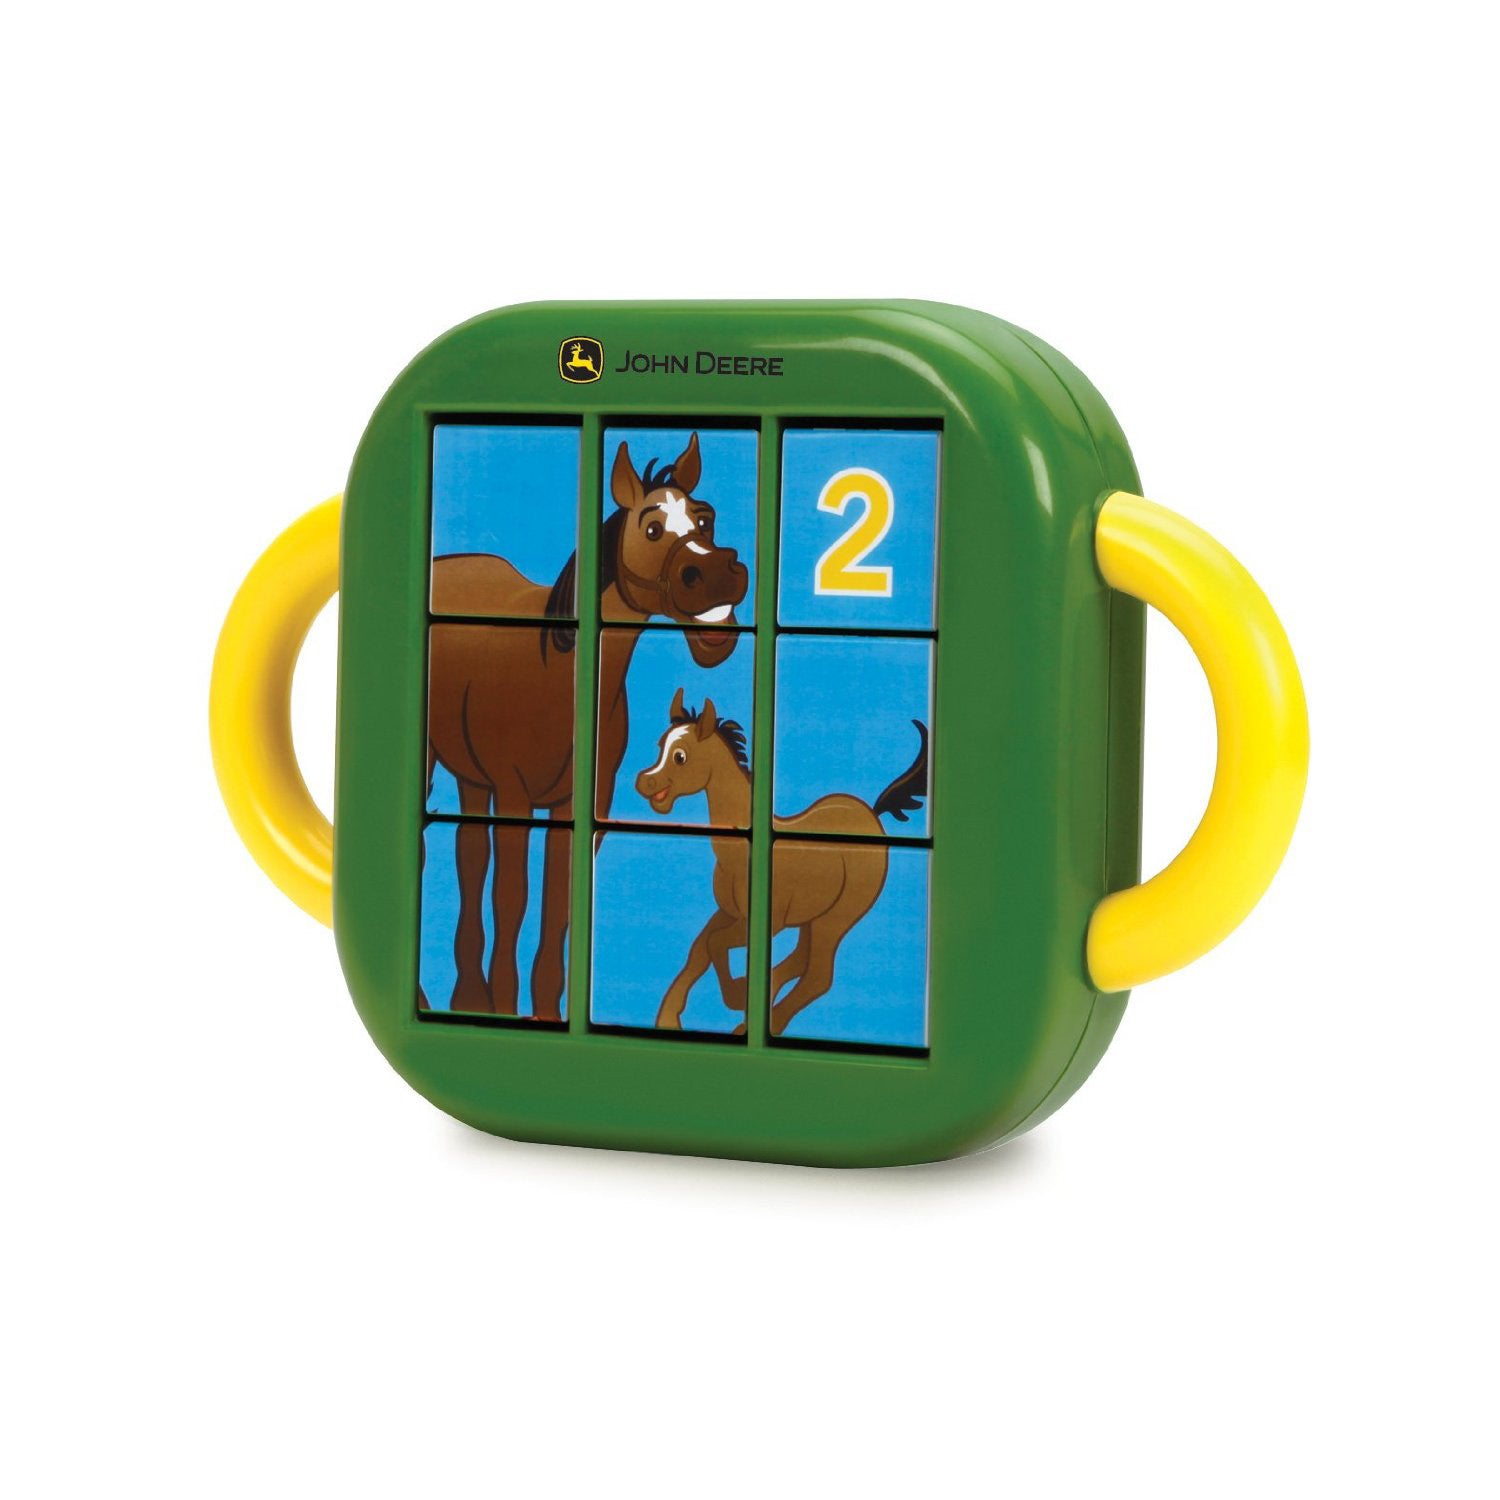 John Deere Toys - First Animal Puzzle